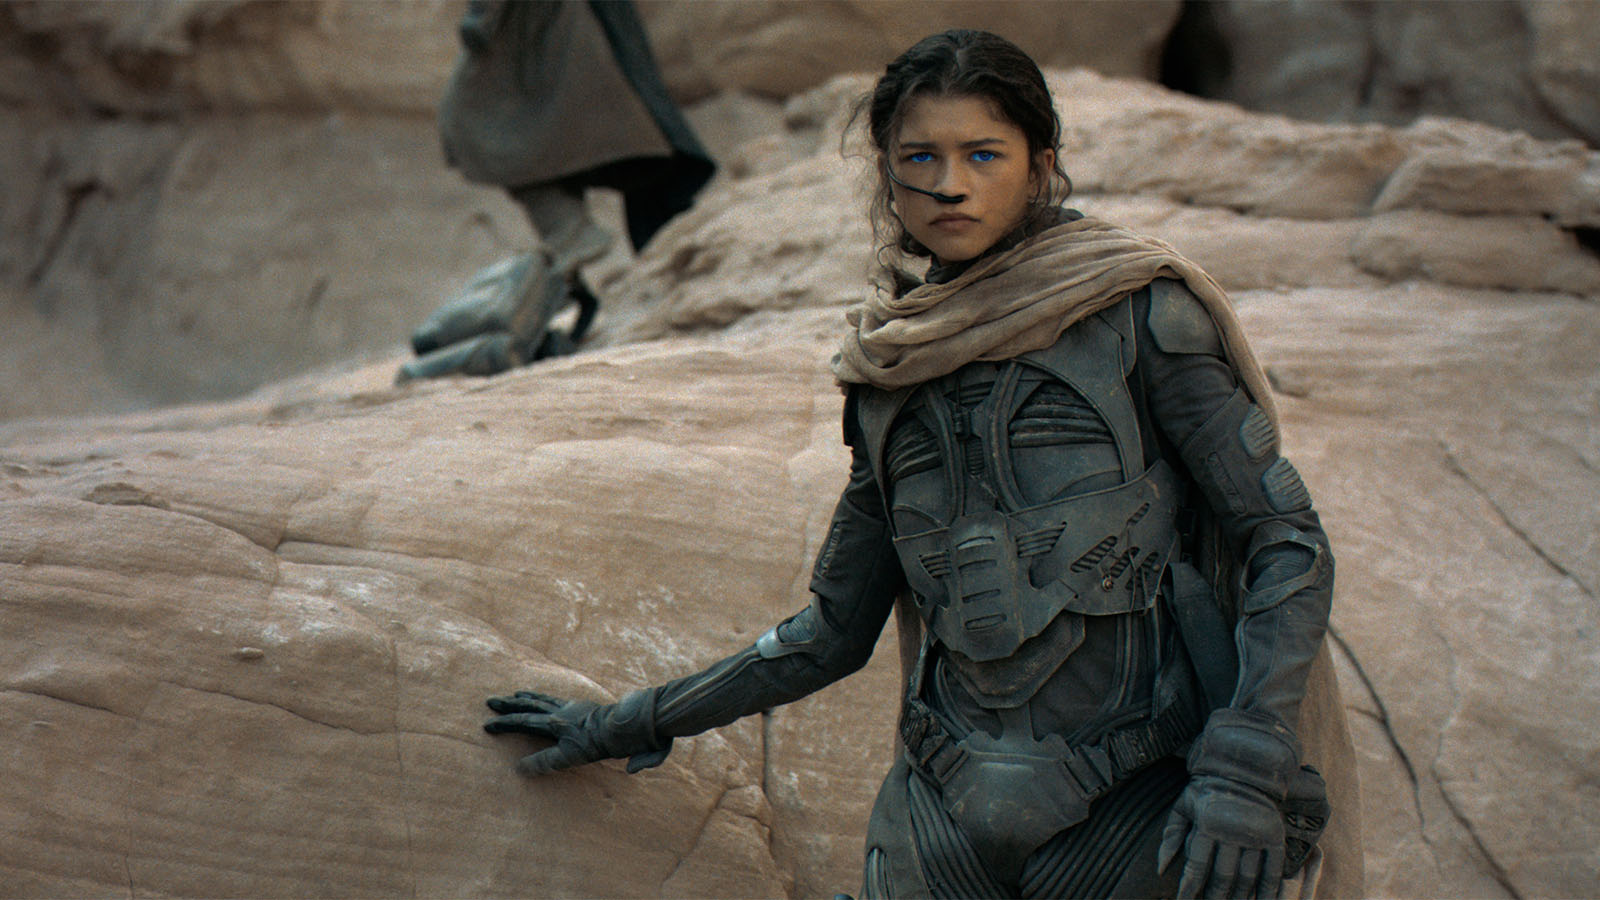 Chani, played by Zendaya, appears in Paul’s dreams before they meet on the planet Arrakis. Image © Warner Bros.